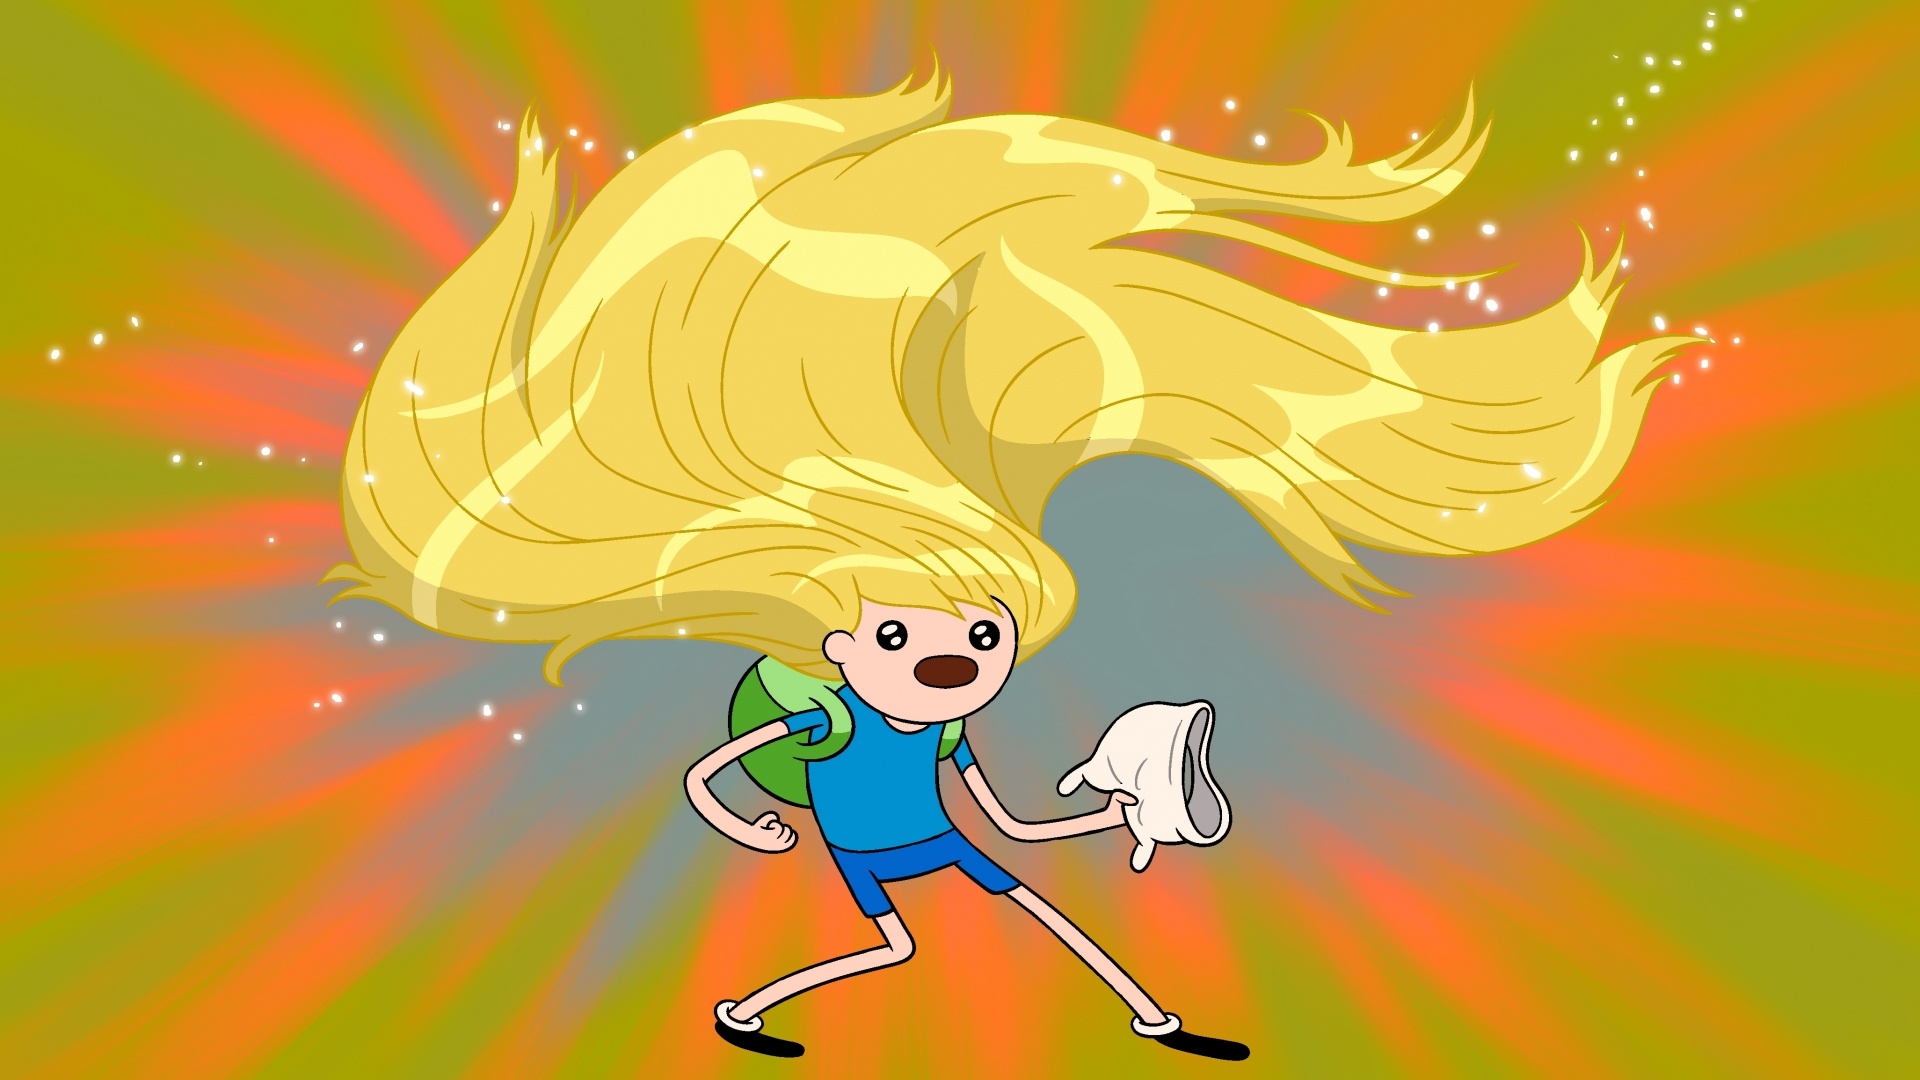 Adventure Time, HD wallpapers, Desktop and Mobile backgrounds, 1920x1080 Full HD Desktop